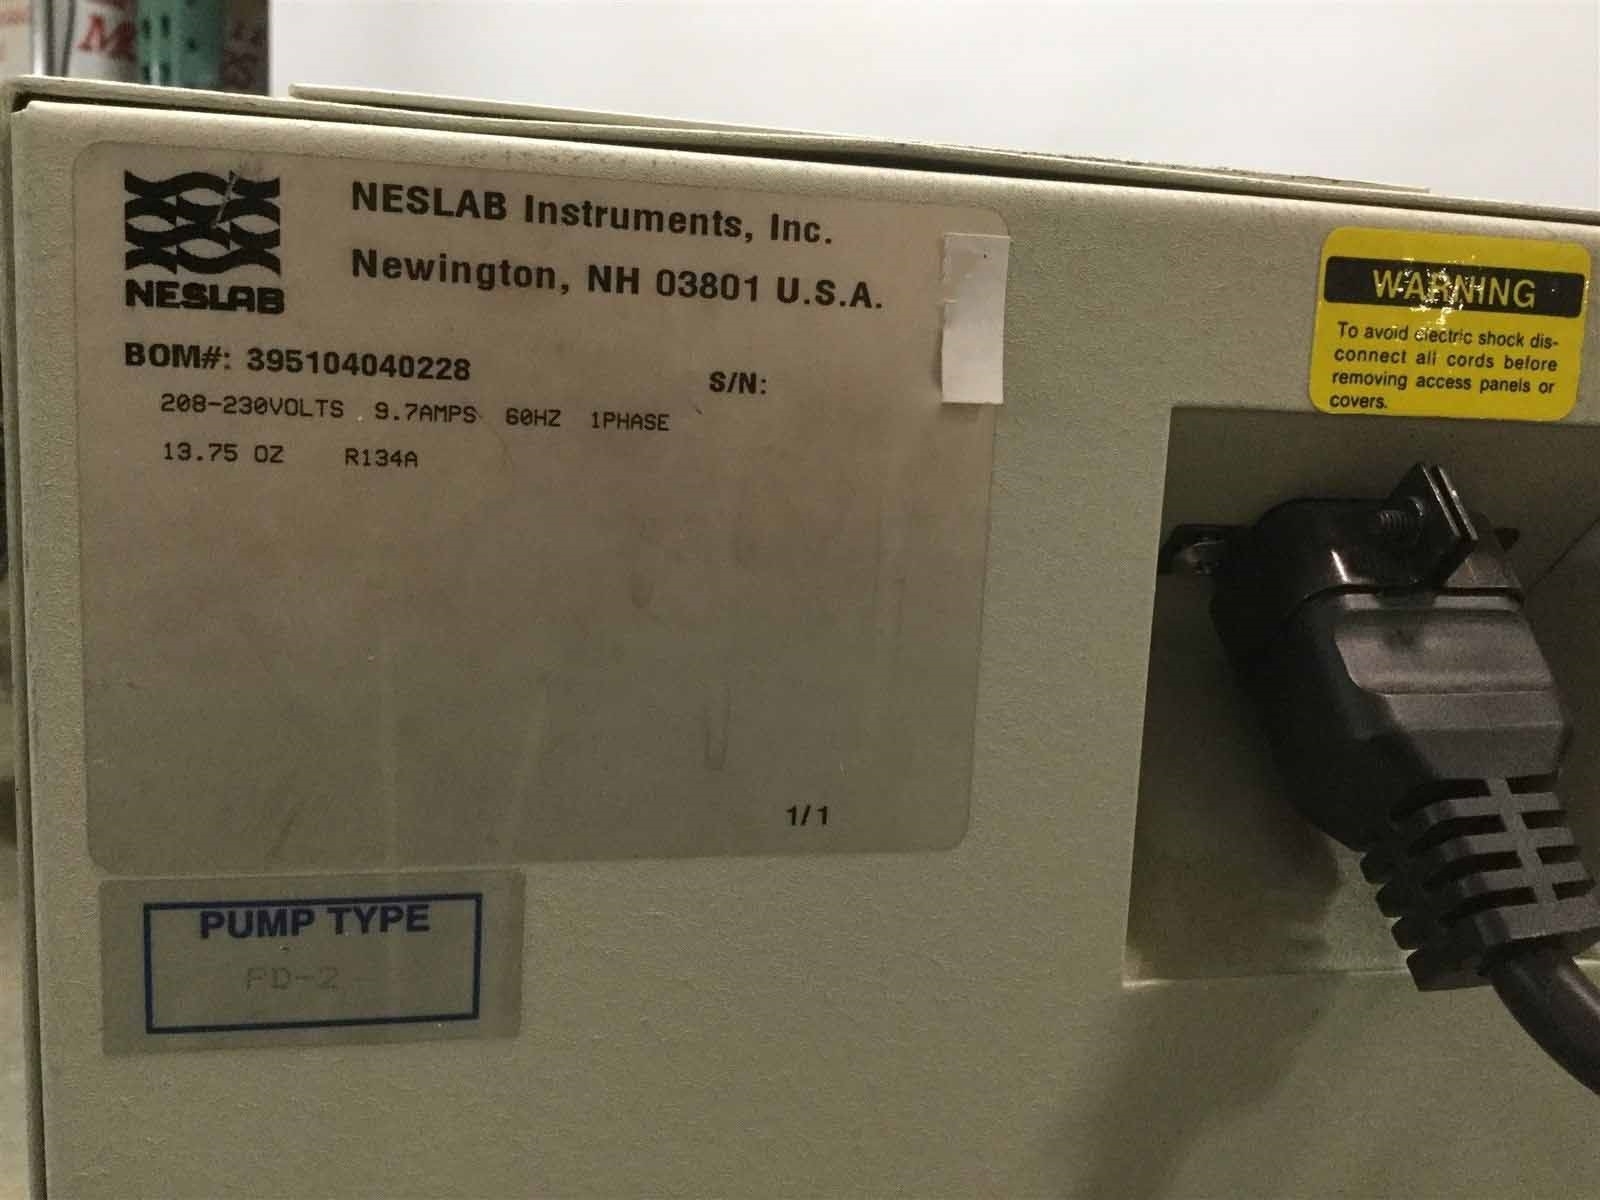 Photo Used NESLAB CFT-75 For Sale